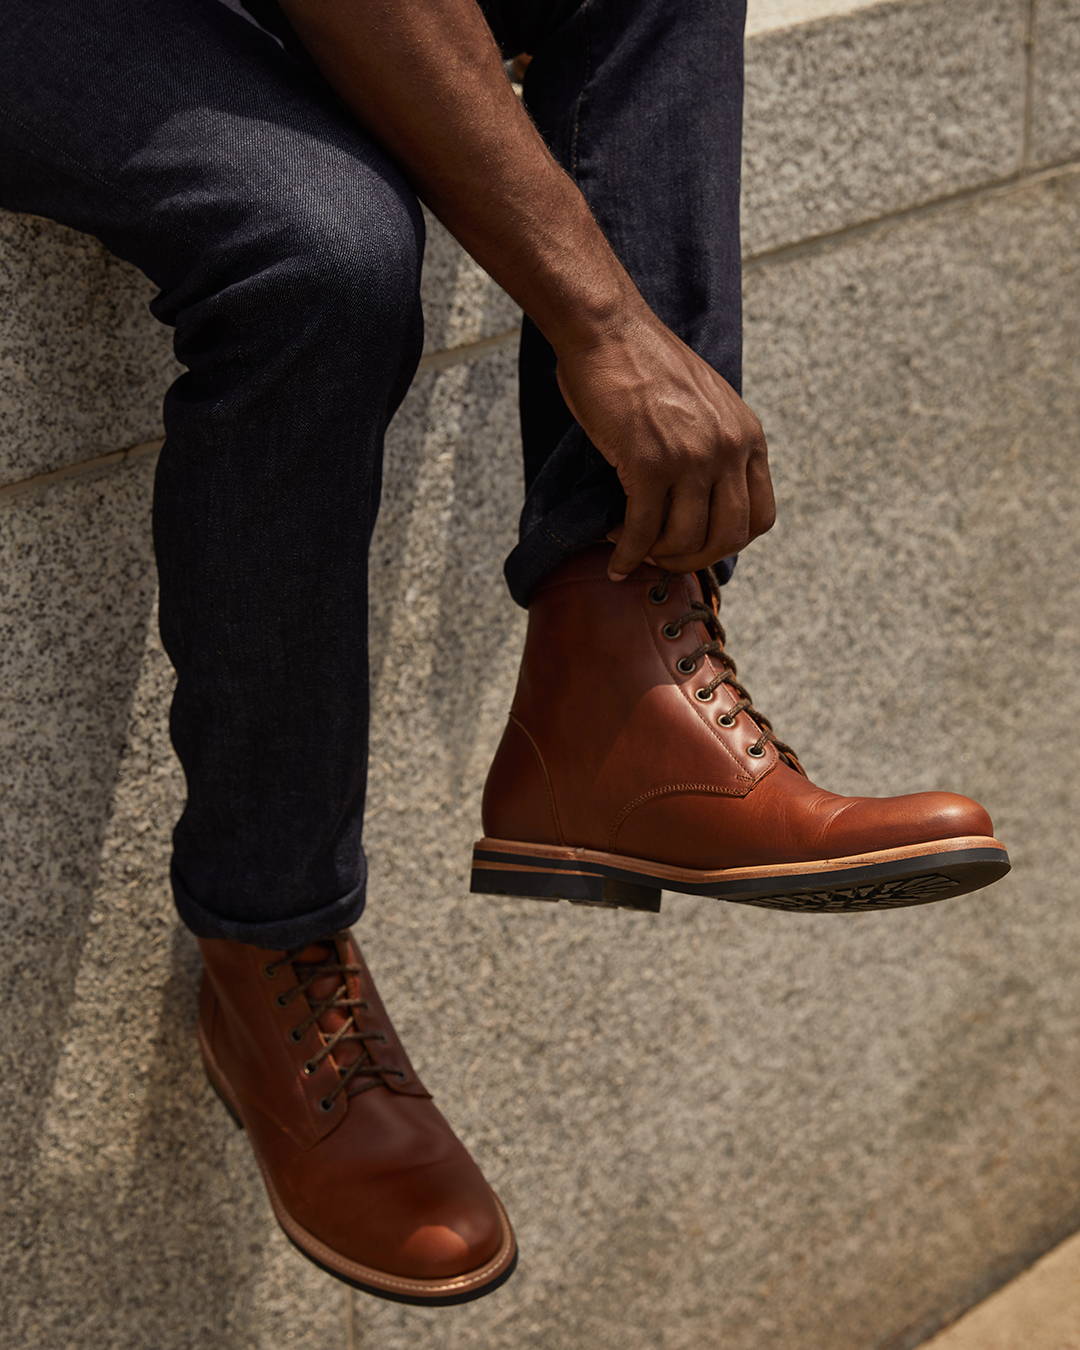 Leather Shoes & Accessories | Handcrafted and Ethically Made | Nisolo